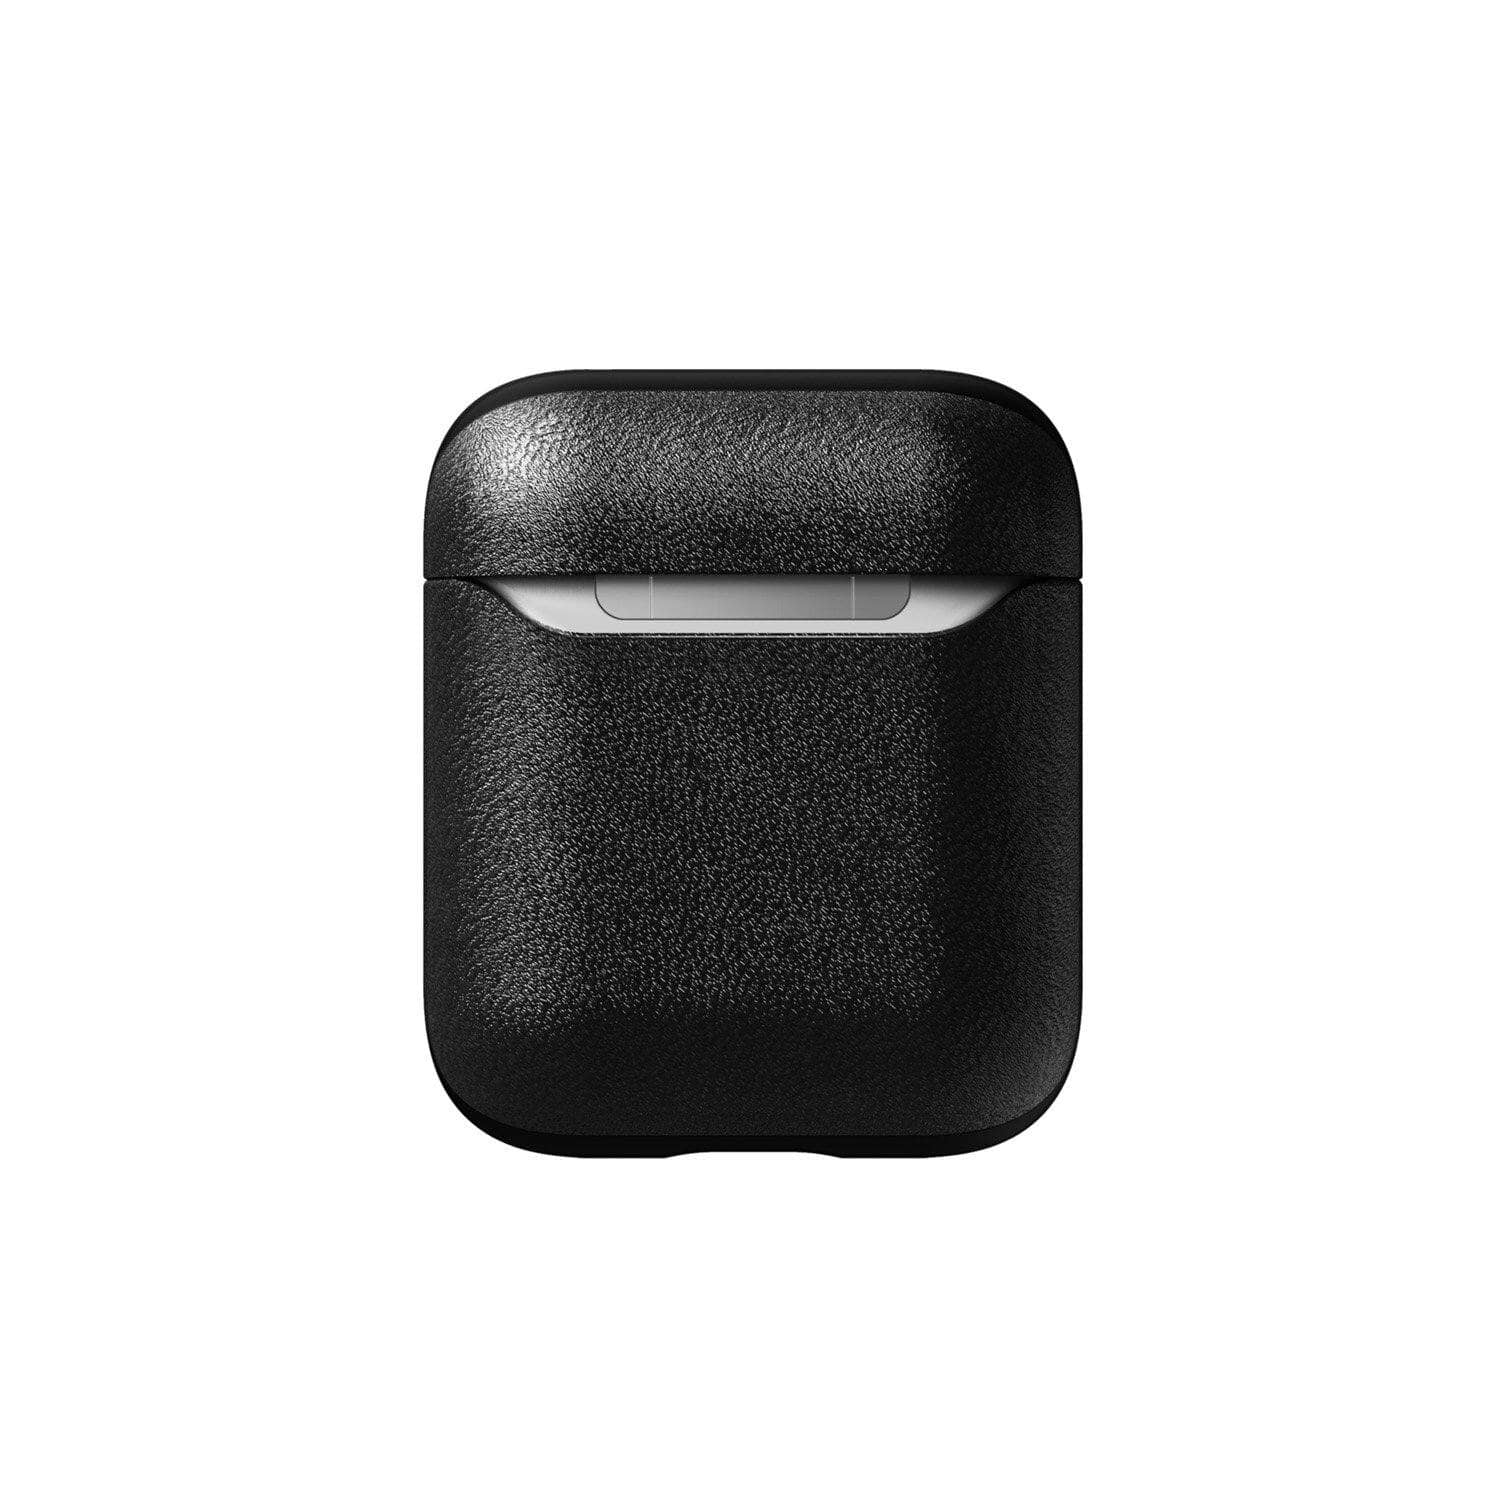 NOMAD Rugged Horween Leather Case for Airpods 1/2, (Brown, Black) Airpods 1/2 Series NOMAD 